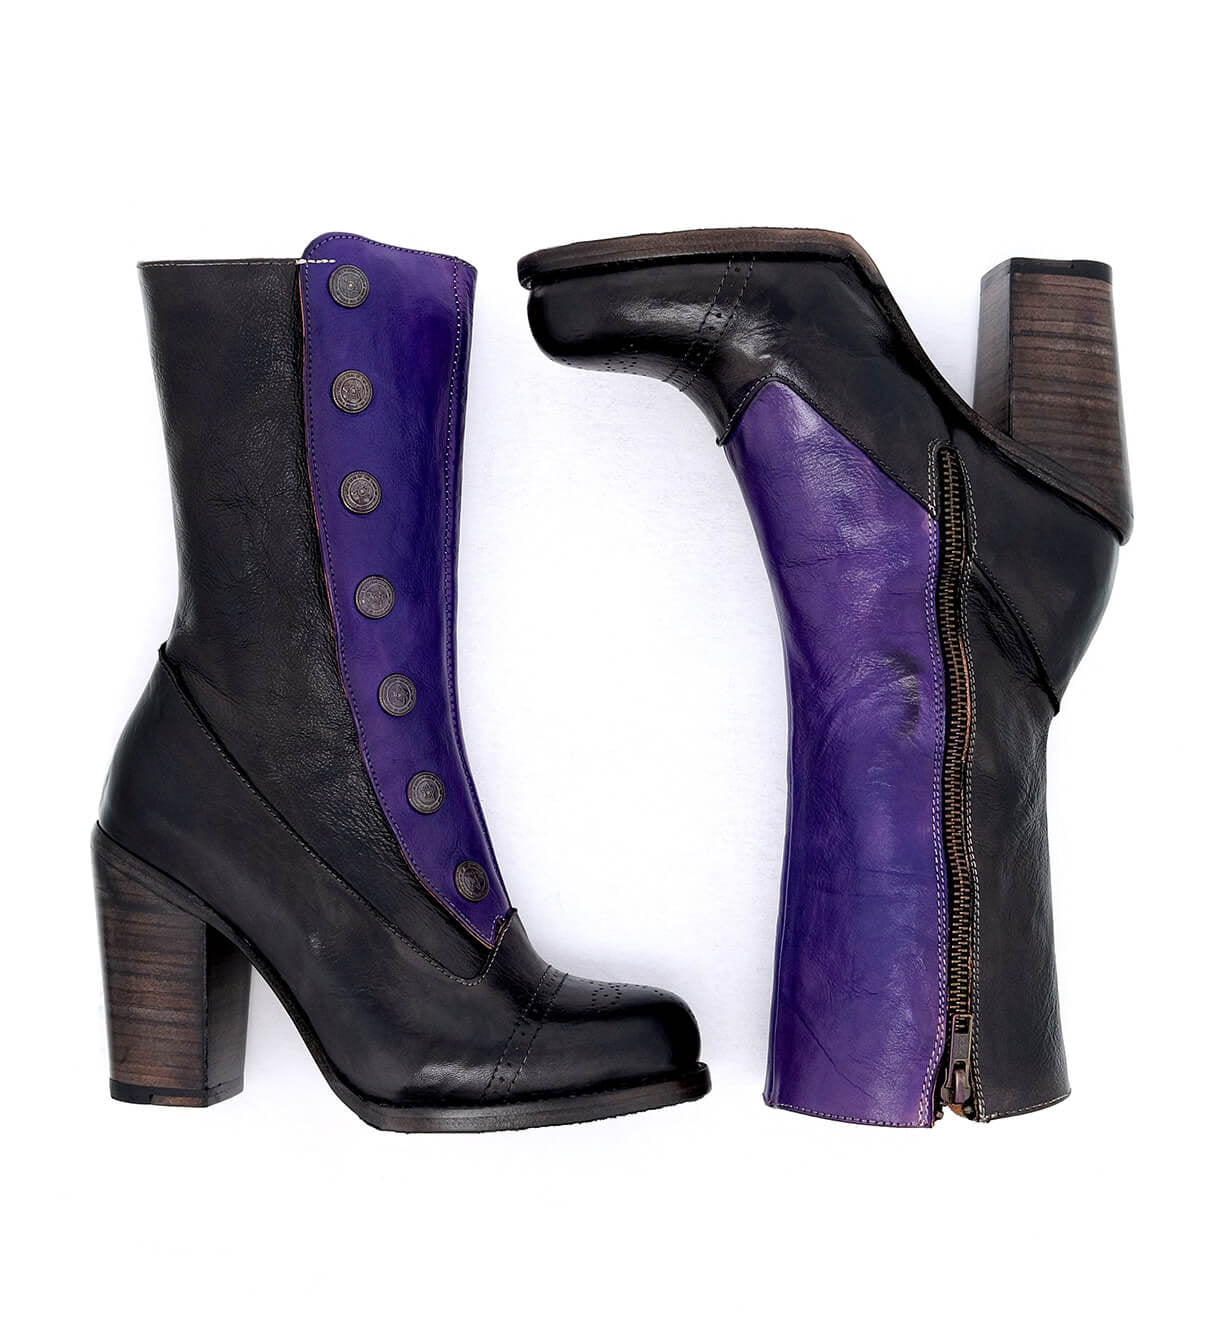 A pair of black and purple two-tone color Amelia boots from Oak Tree Farms on a white background.